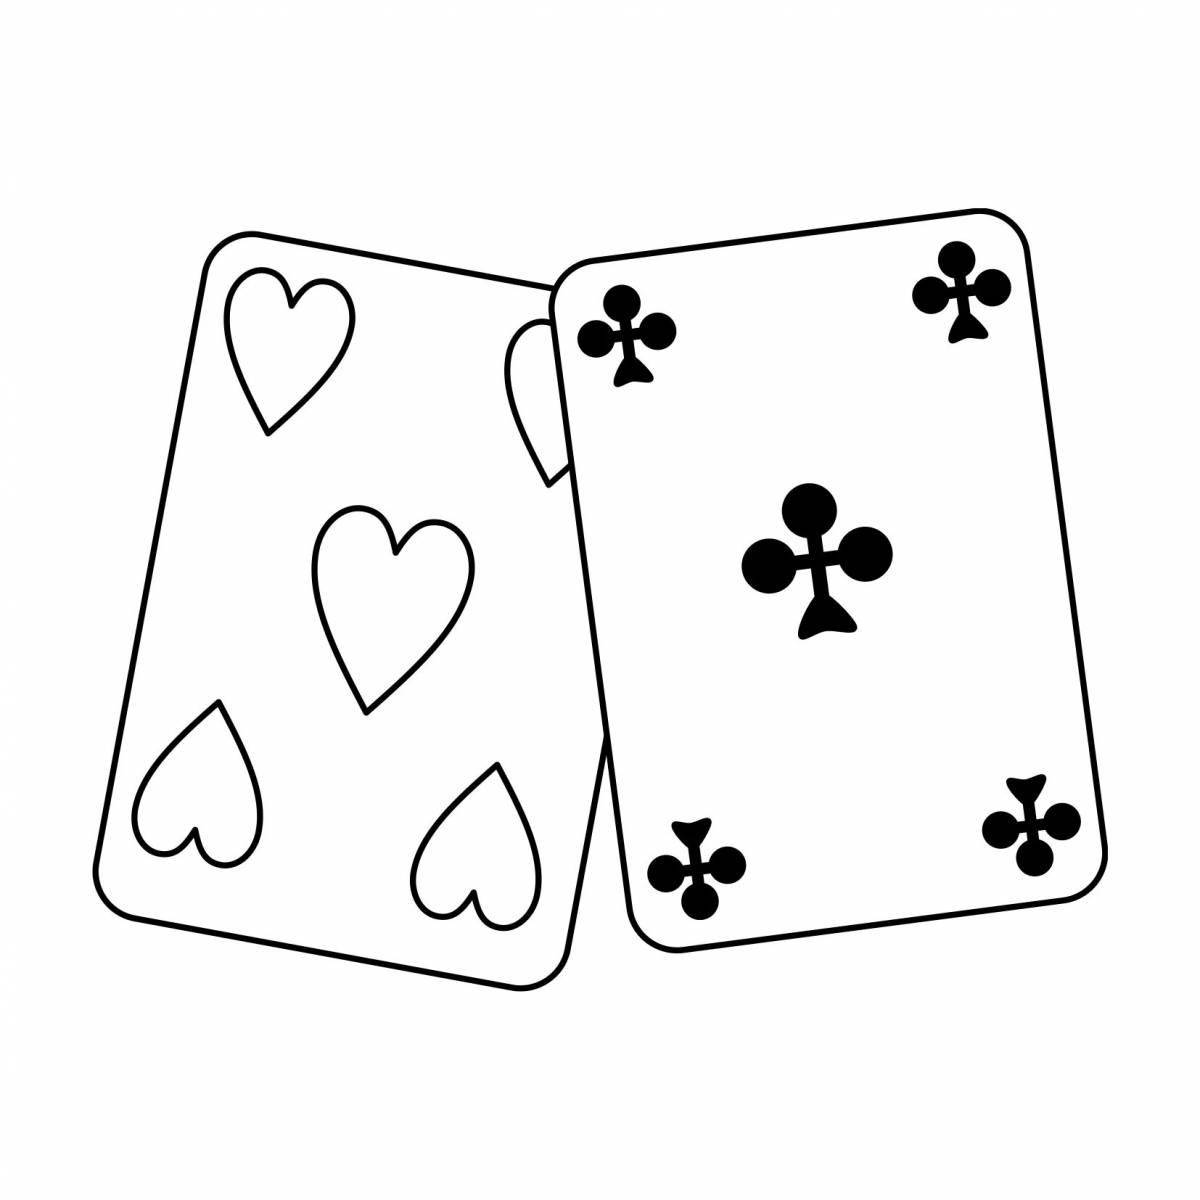 Playing cards #23